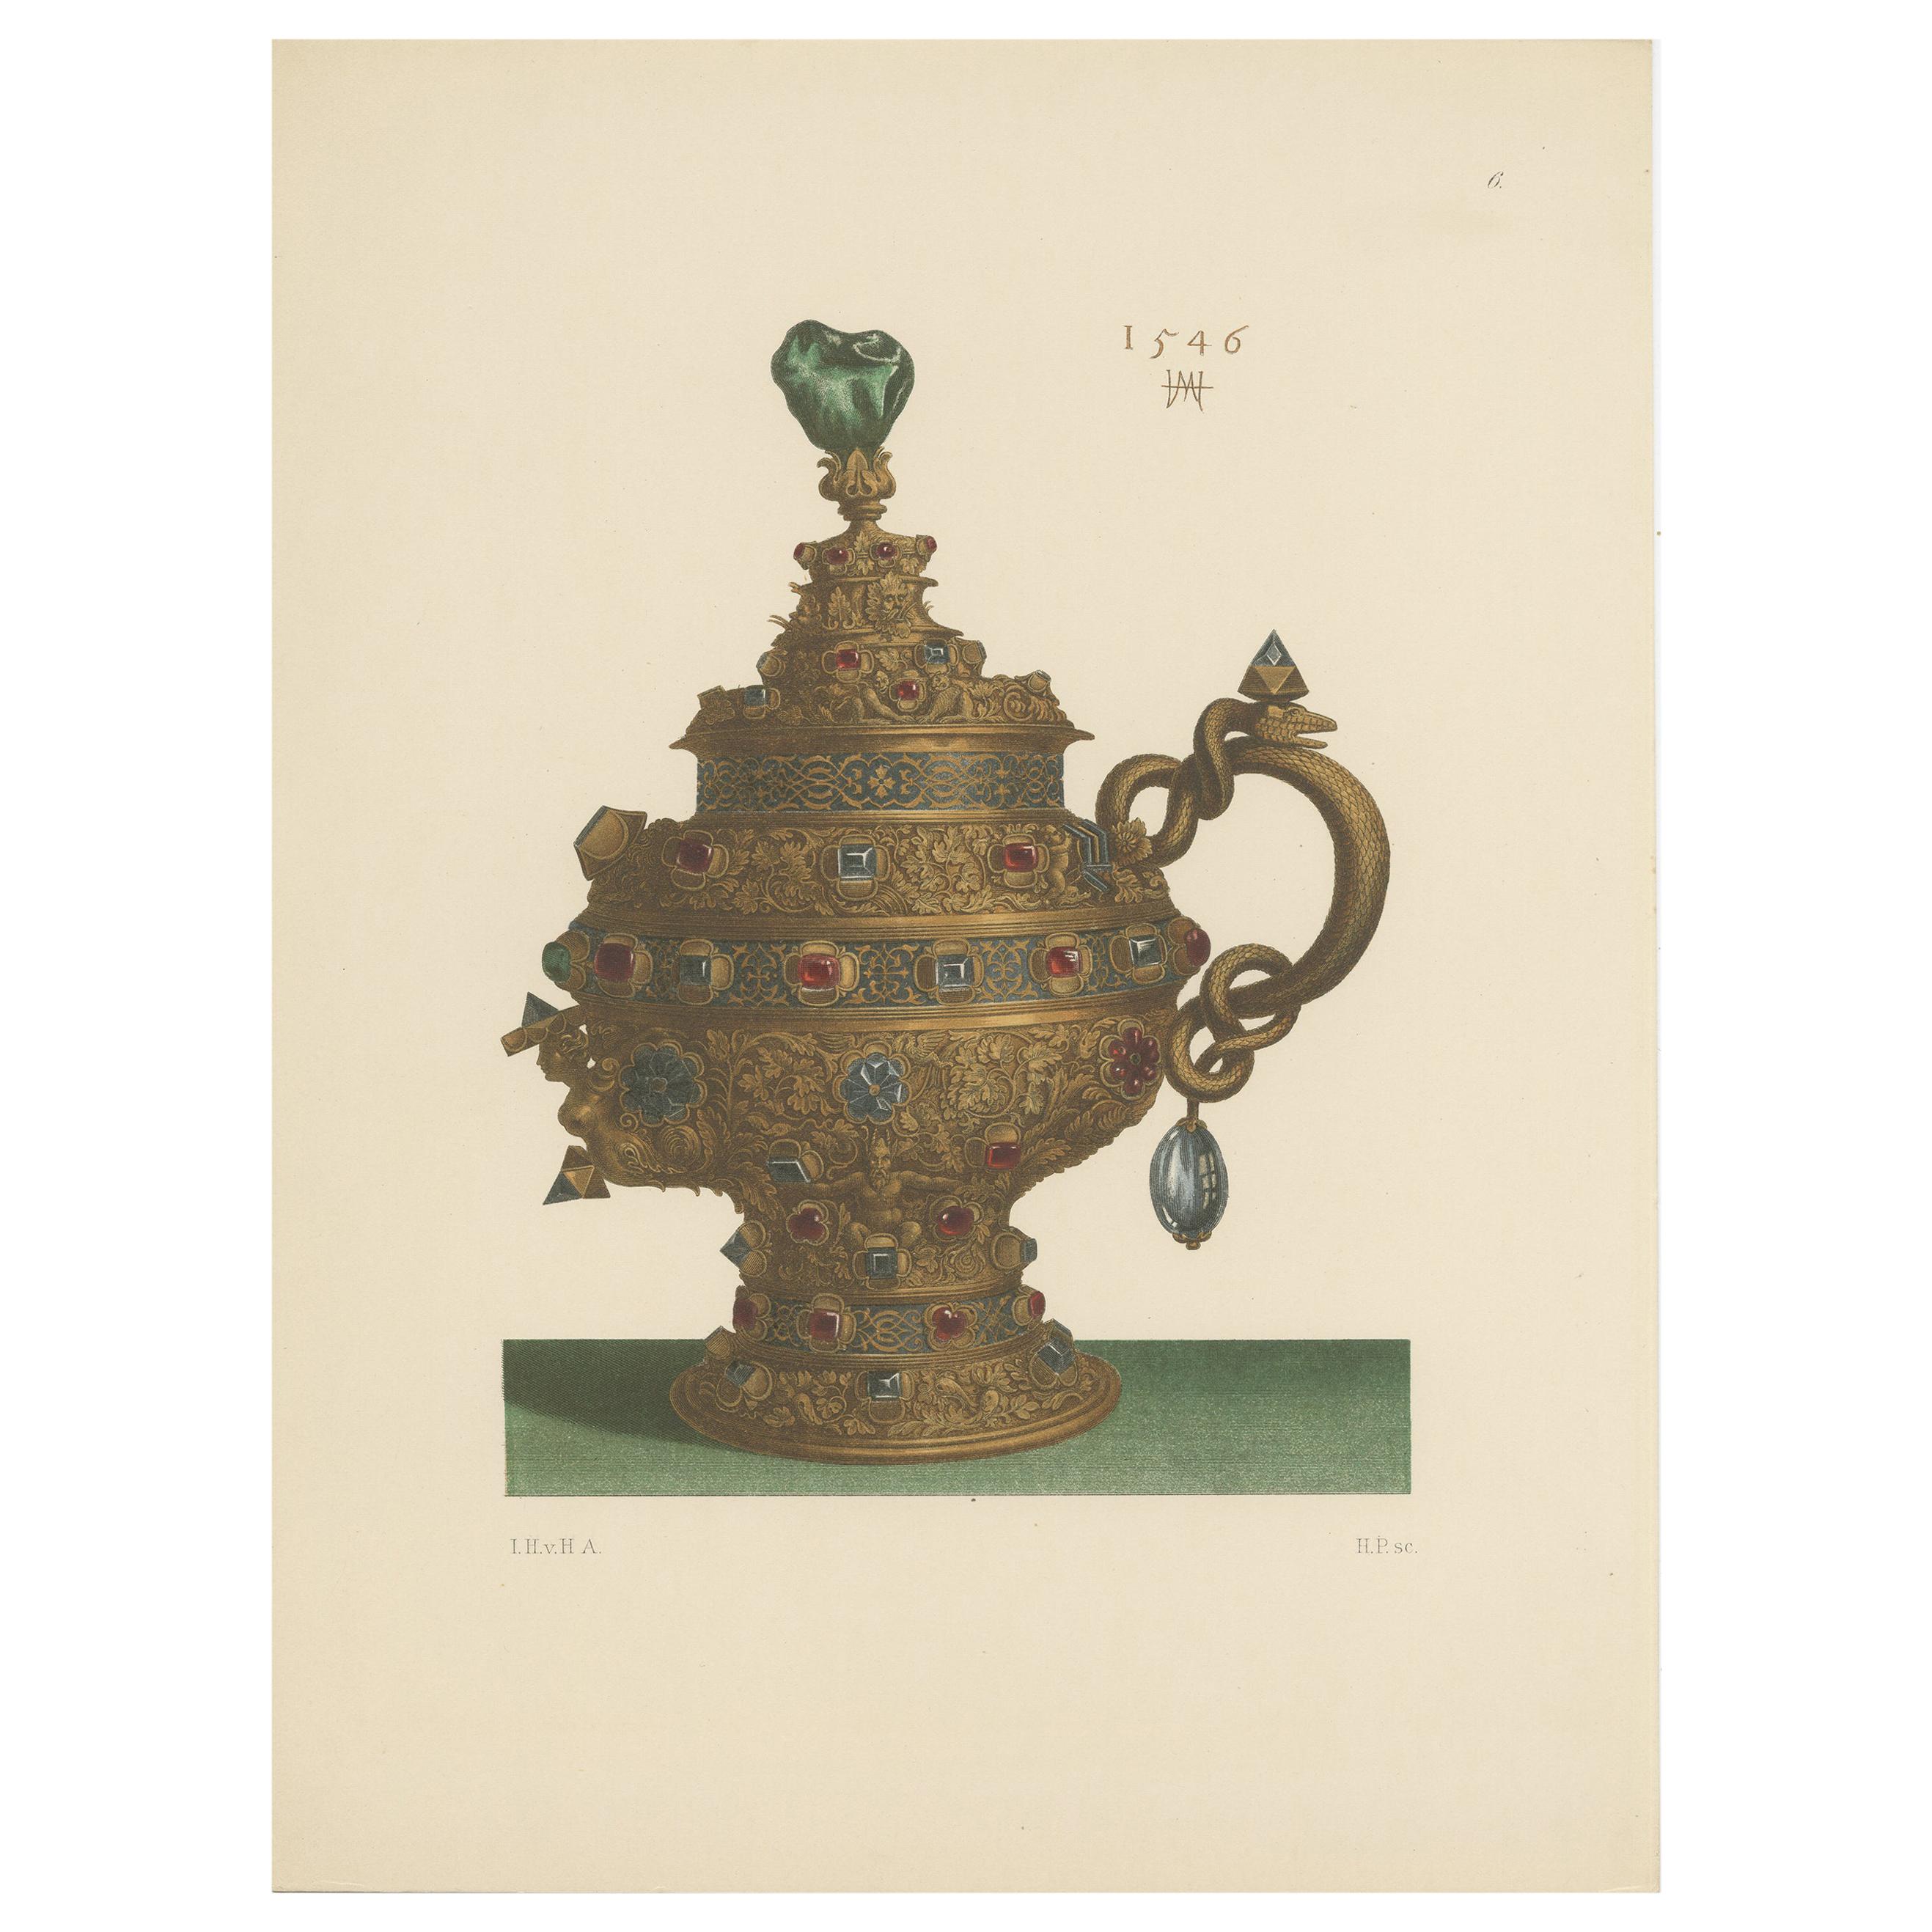 Antique Print of a Gold Pokal with Lid and Handle by Hefner-Alteneck, 1890